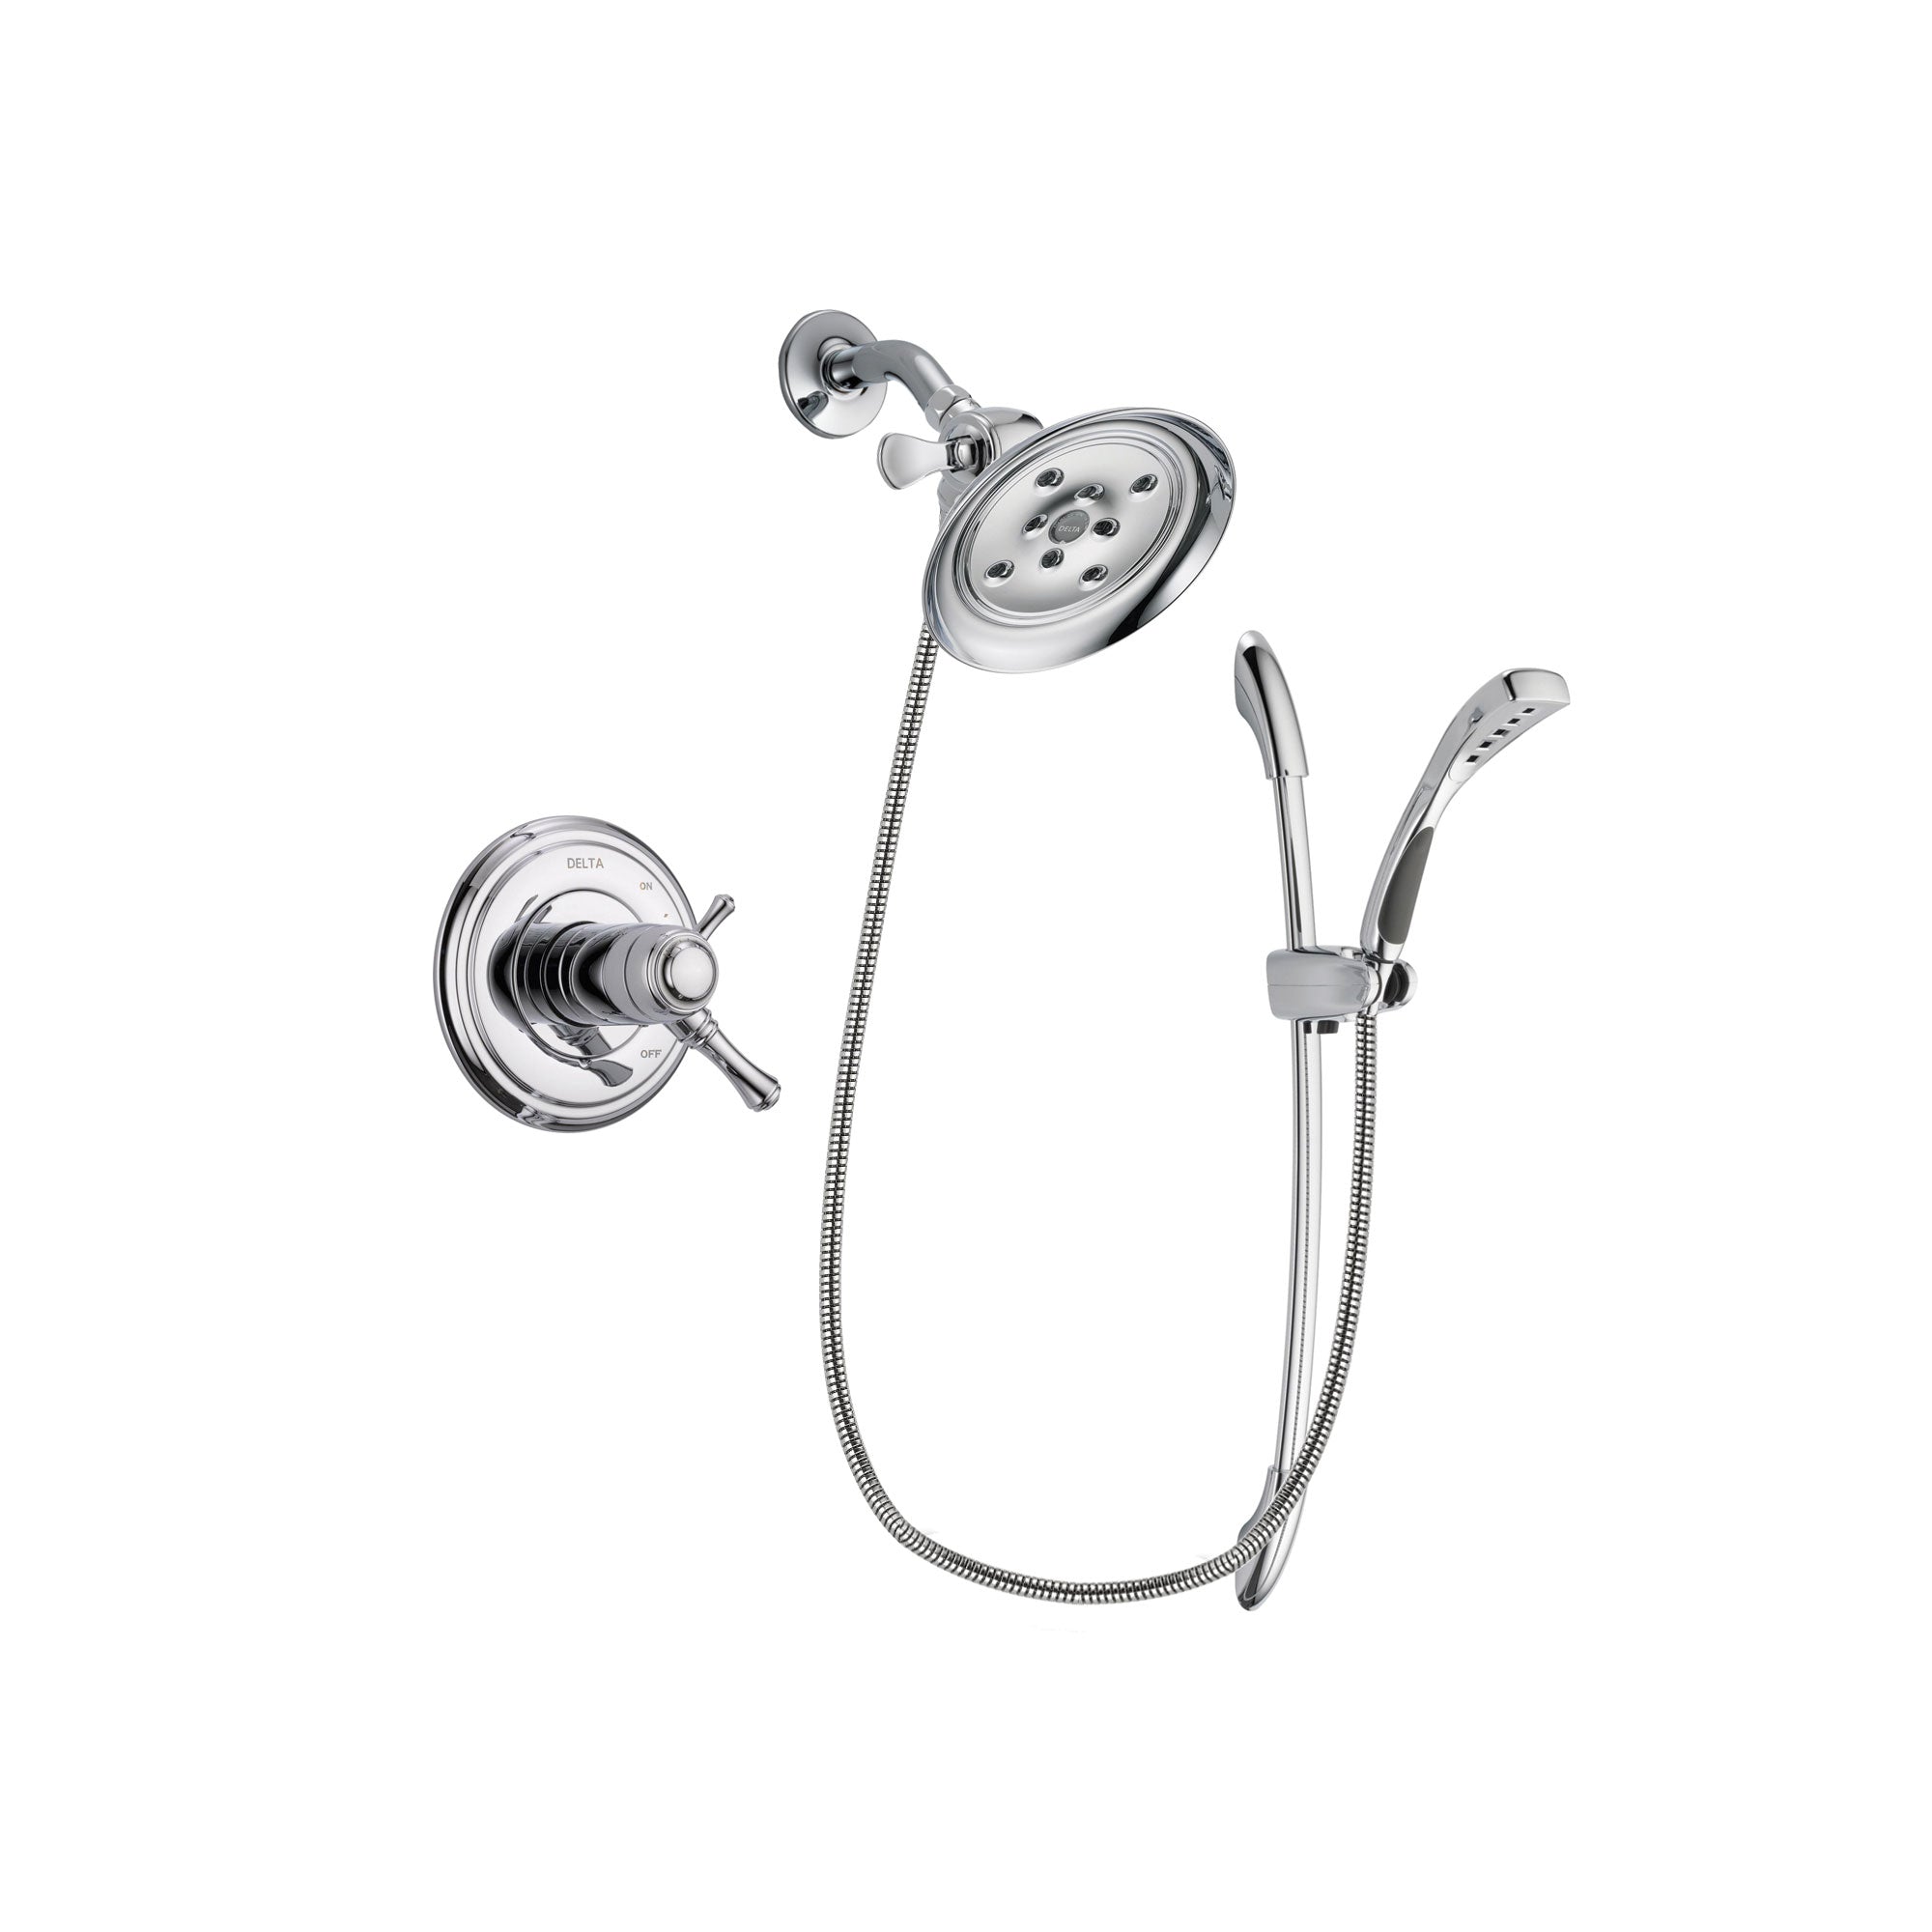 Delta Cassidy Chrome Finish Thermostatic Shower Faucet System Package with Large Rain Showerhead and Handheld Shower with Slide Bar Includes Rough-in Valve DSP0502V